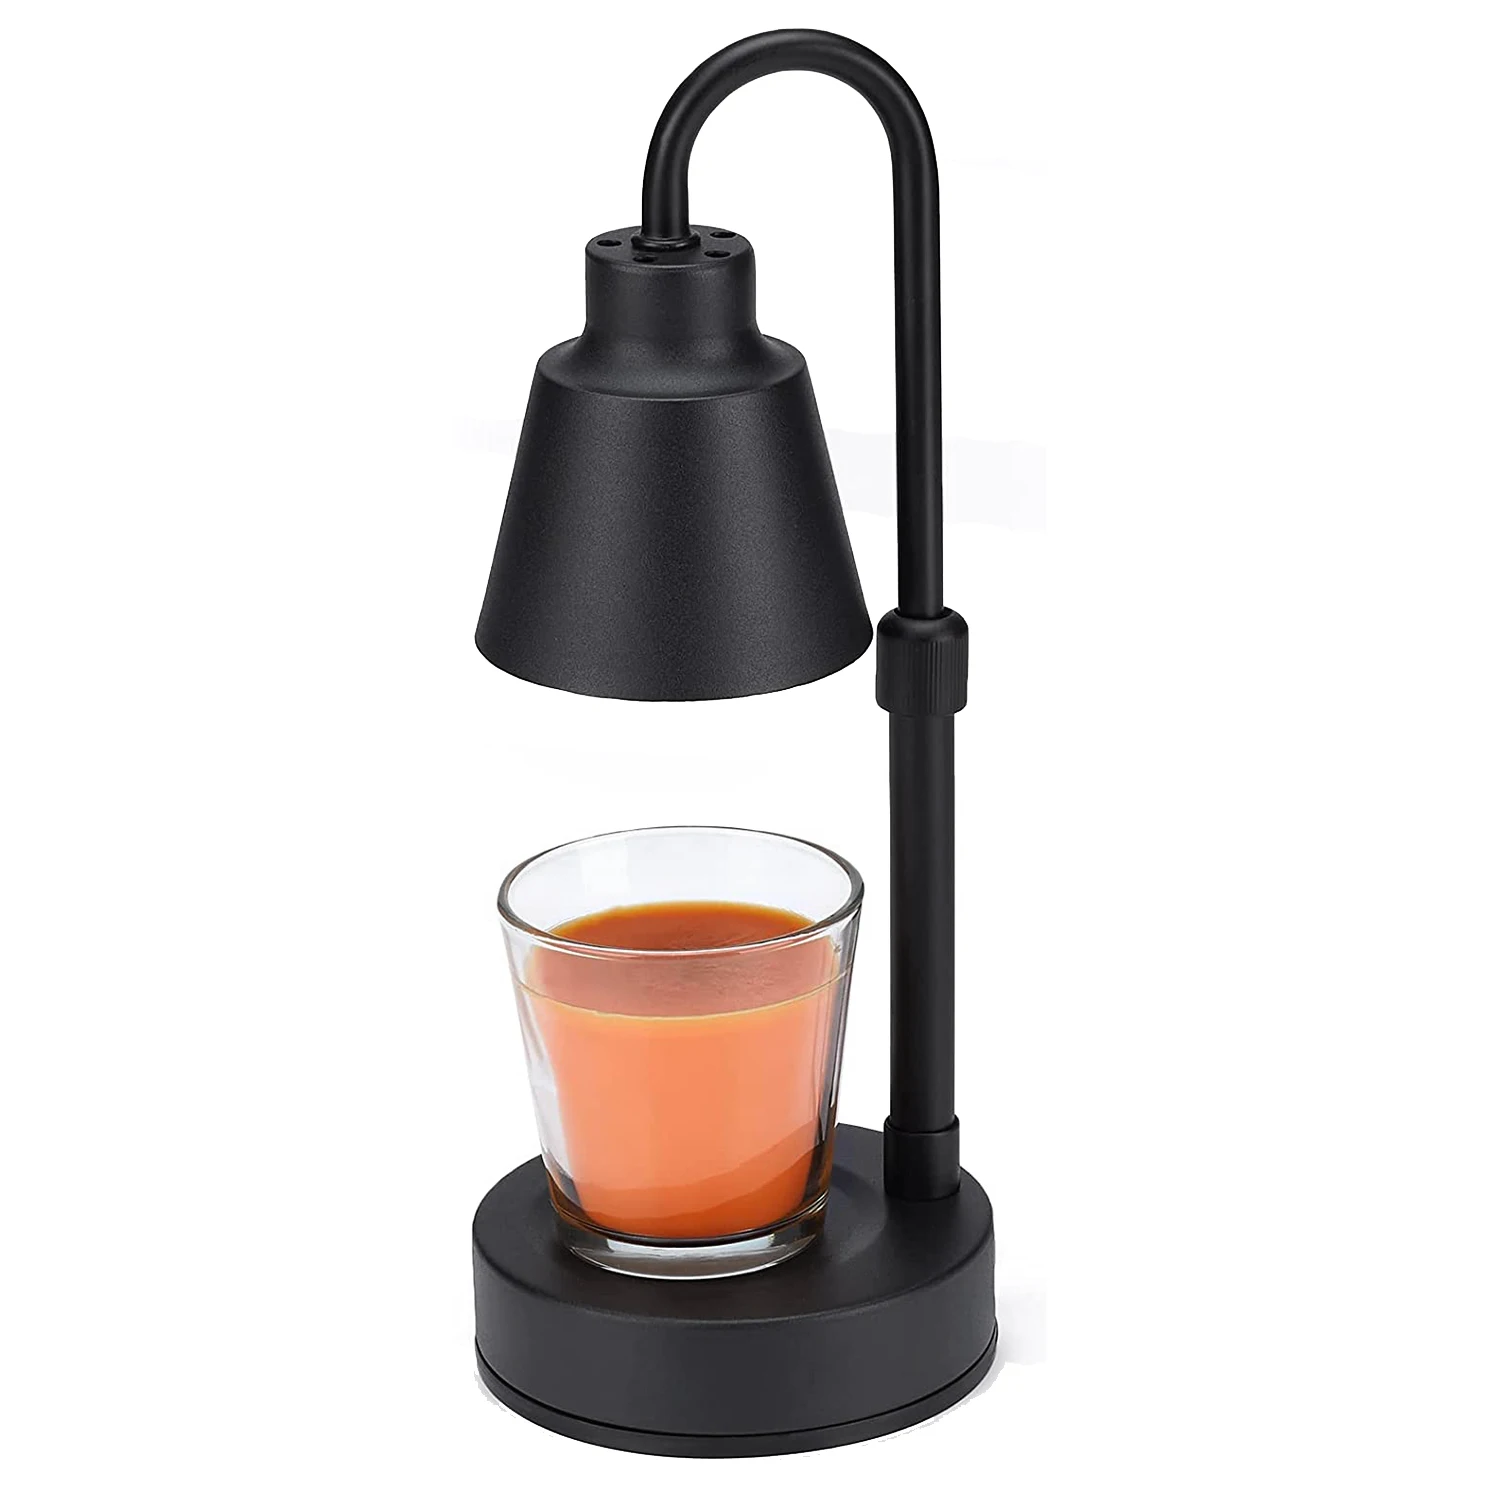 

Candle Lamp for Jar Candle,Wax Warmer Lamp Adjustable Heat & Height No Flame Candle Melter,with 2 Bulbs Black US Plug